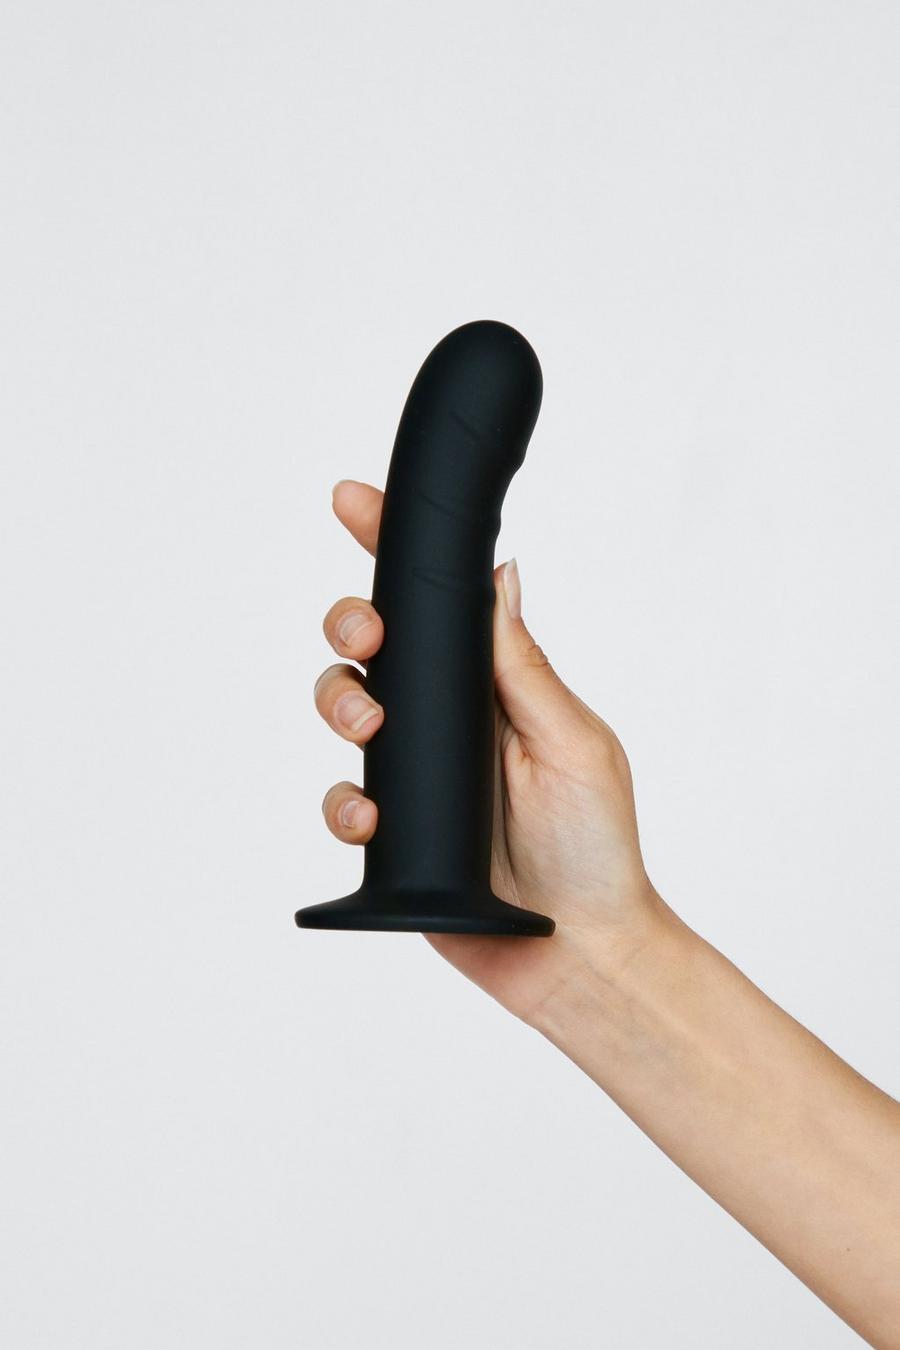 Large Suction Cup Dildo Sex Toy